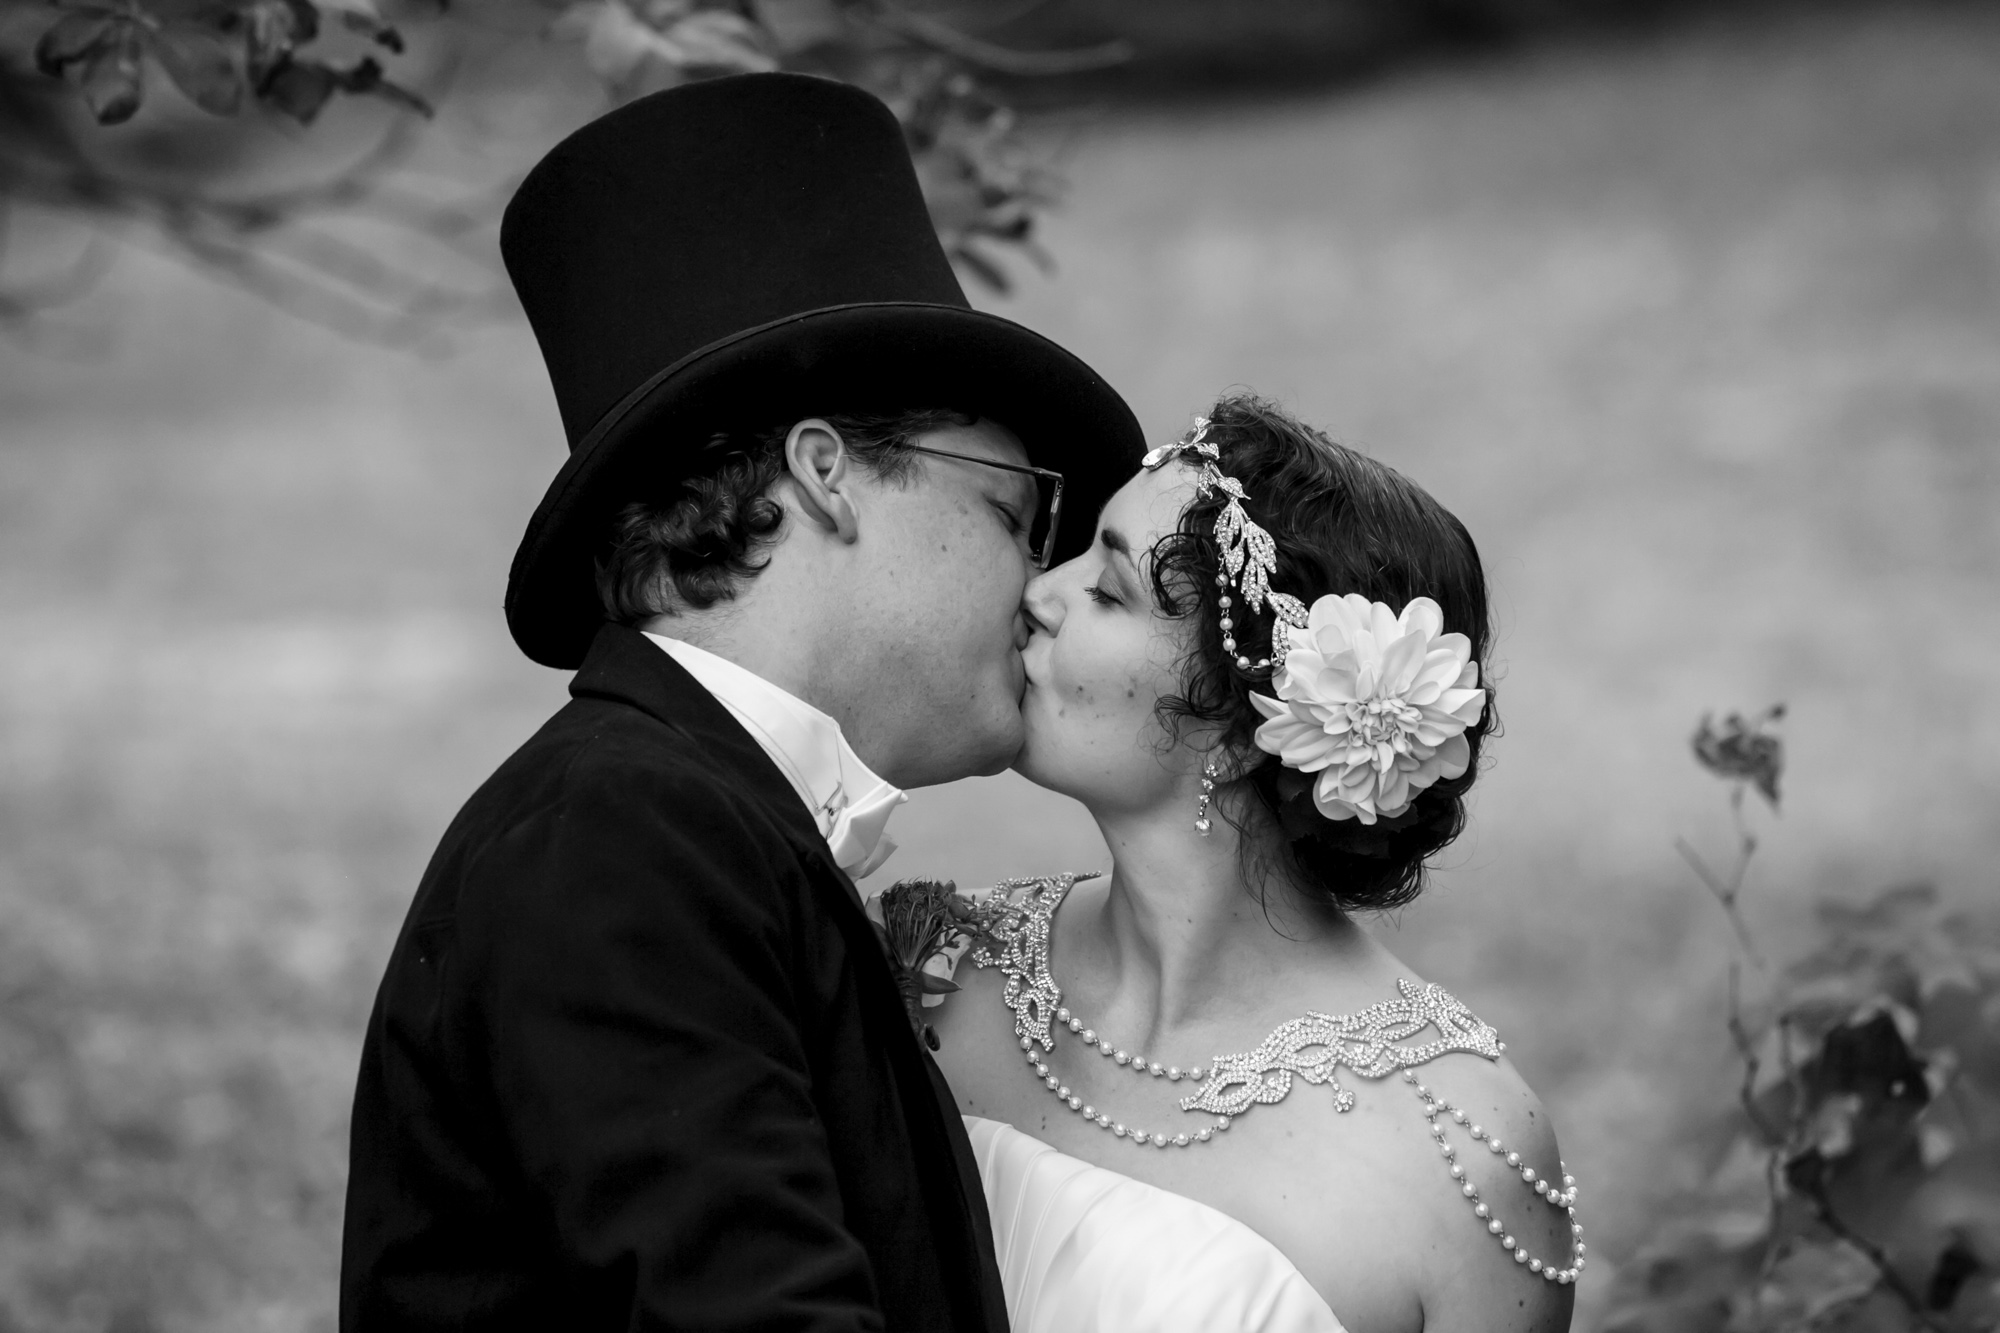 A black and white photo of a wedding couple including a man wearing a top hat and a woman wearing a flower and rhinestone headpiece kissing.